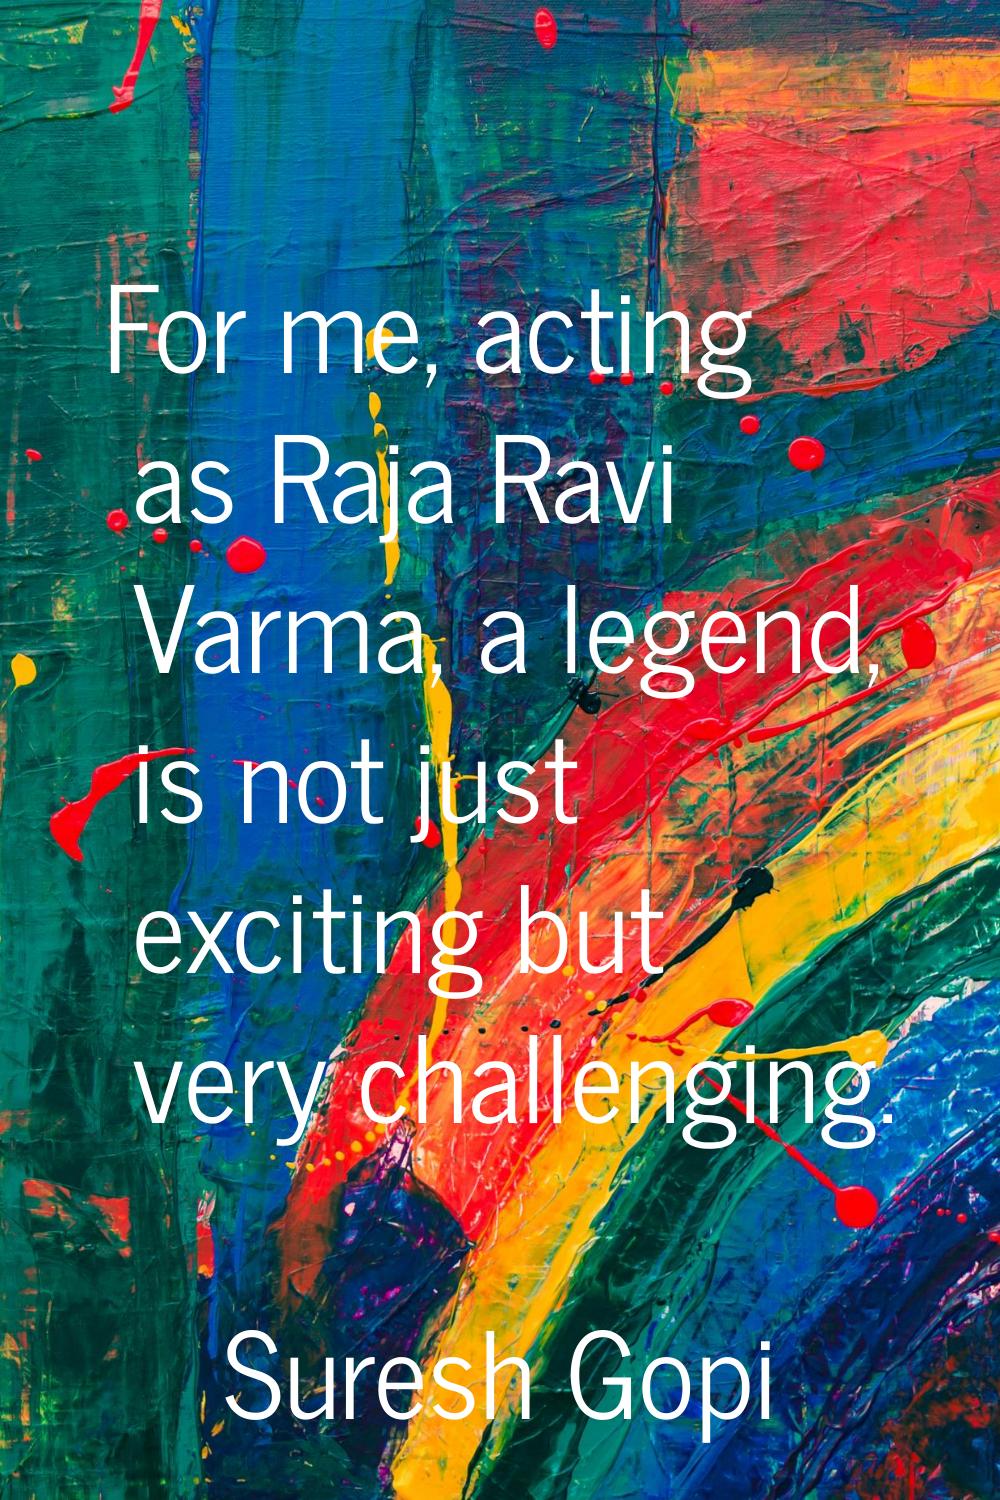 For me, acting as Raja Ravi Varma, a legend, is not just exciting but very challenging.